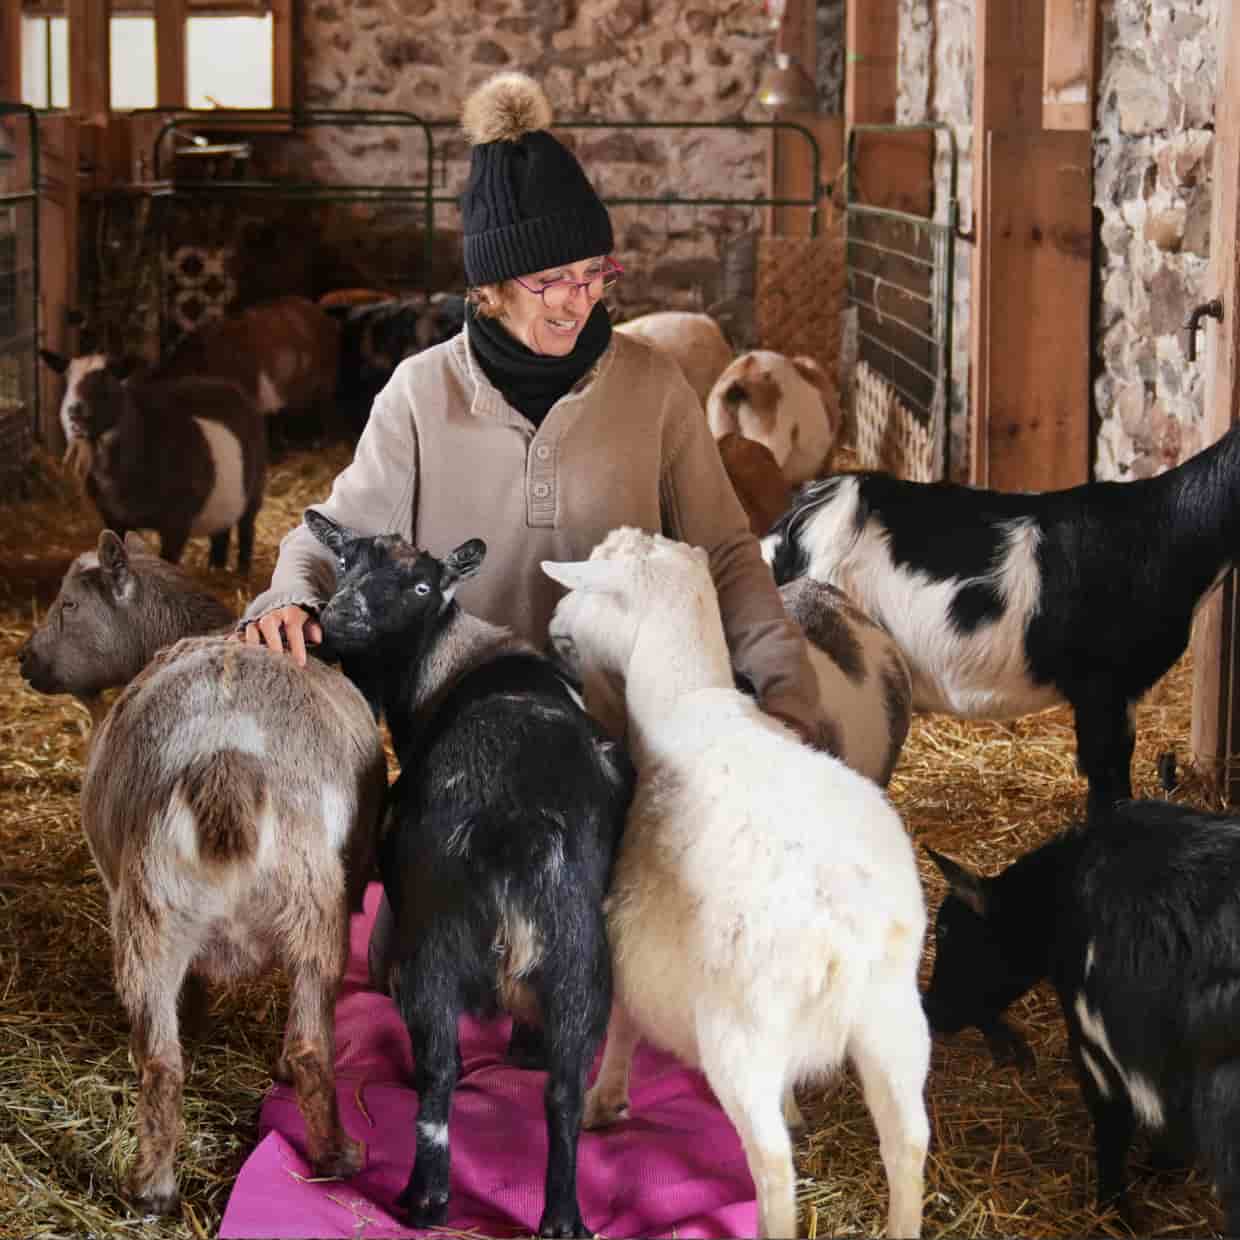 A person sitting on a floor surrounded by a group of goats.